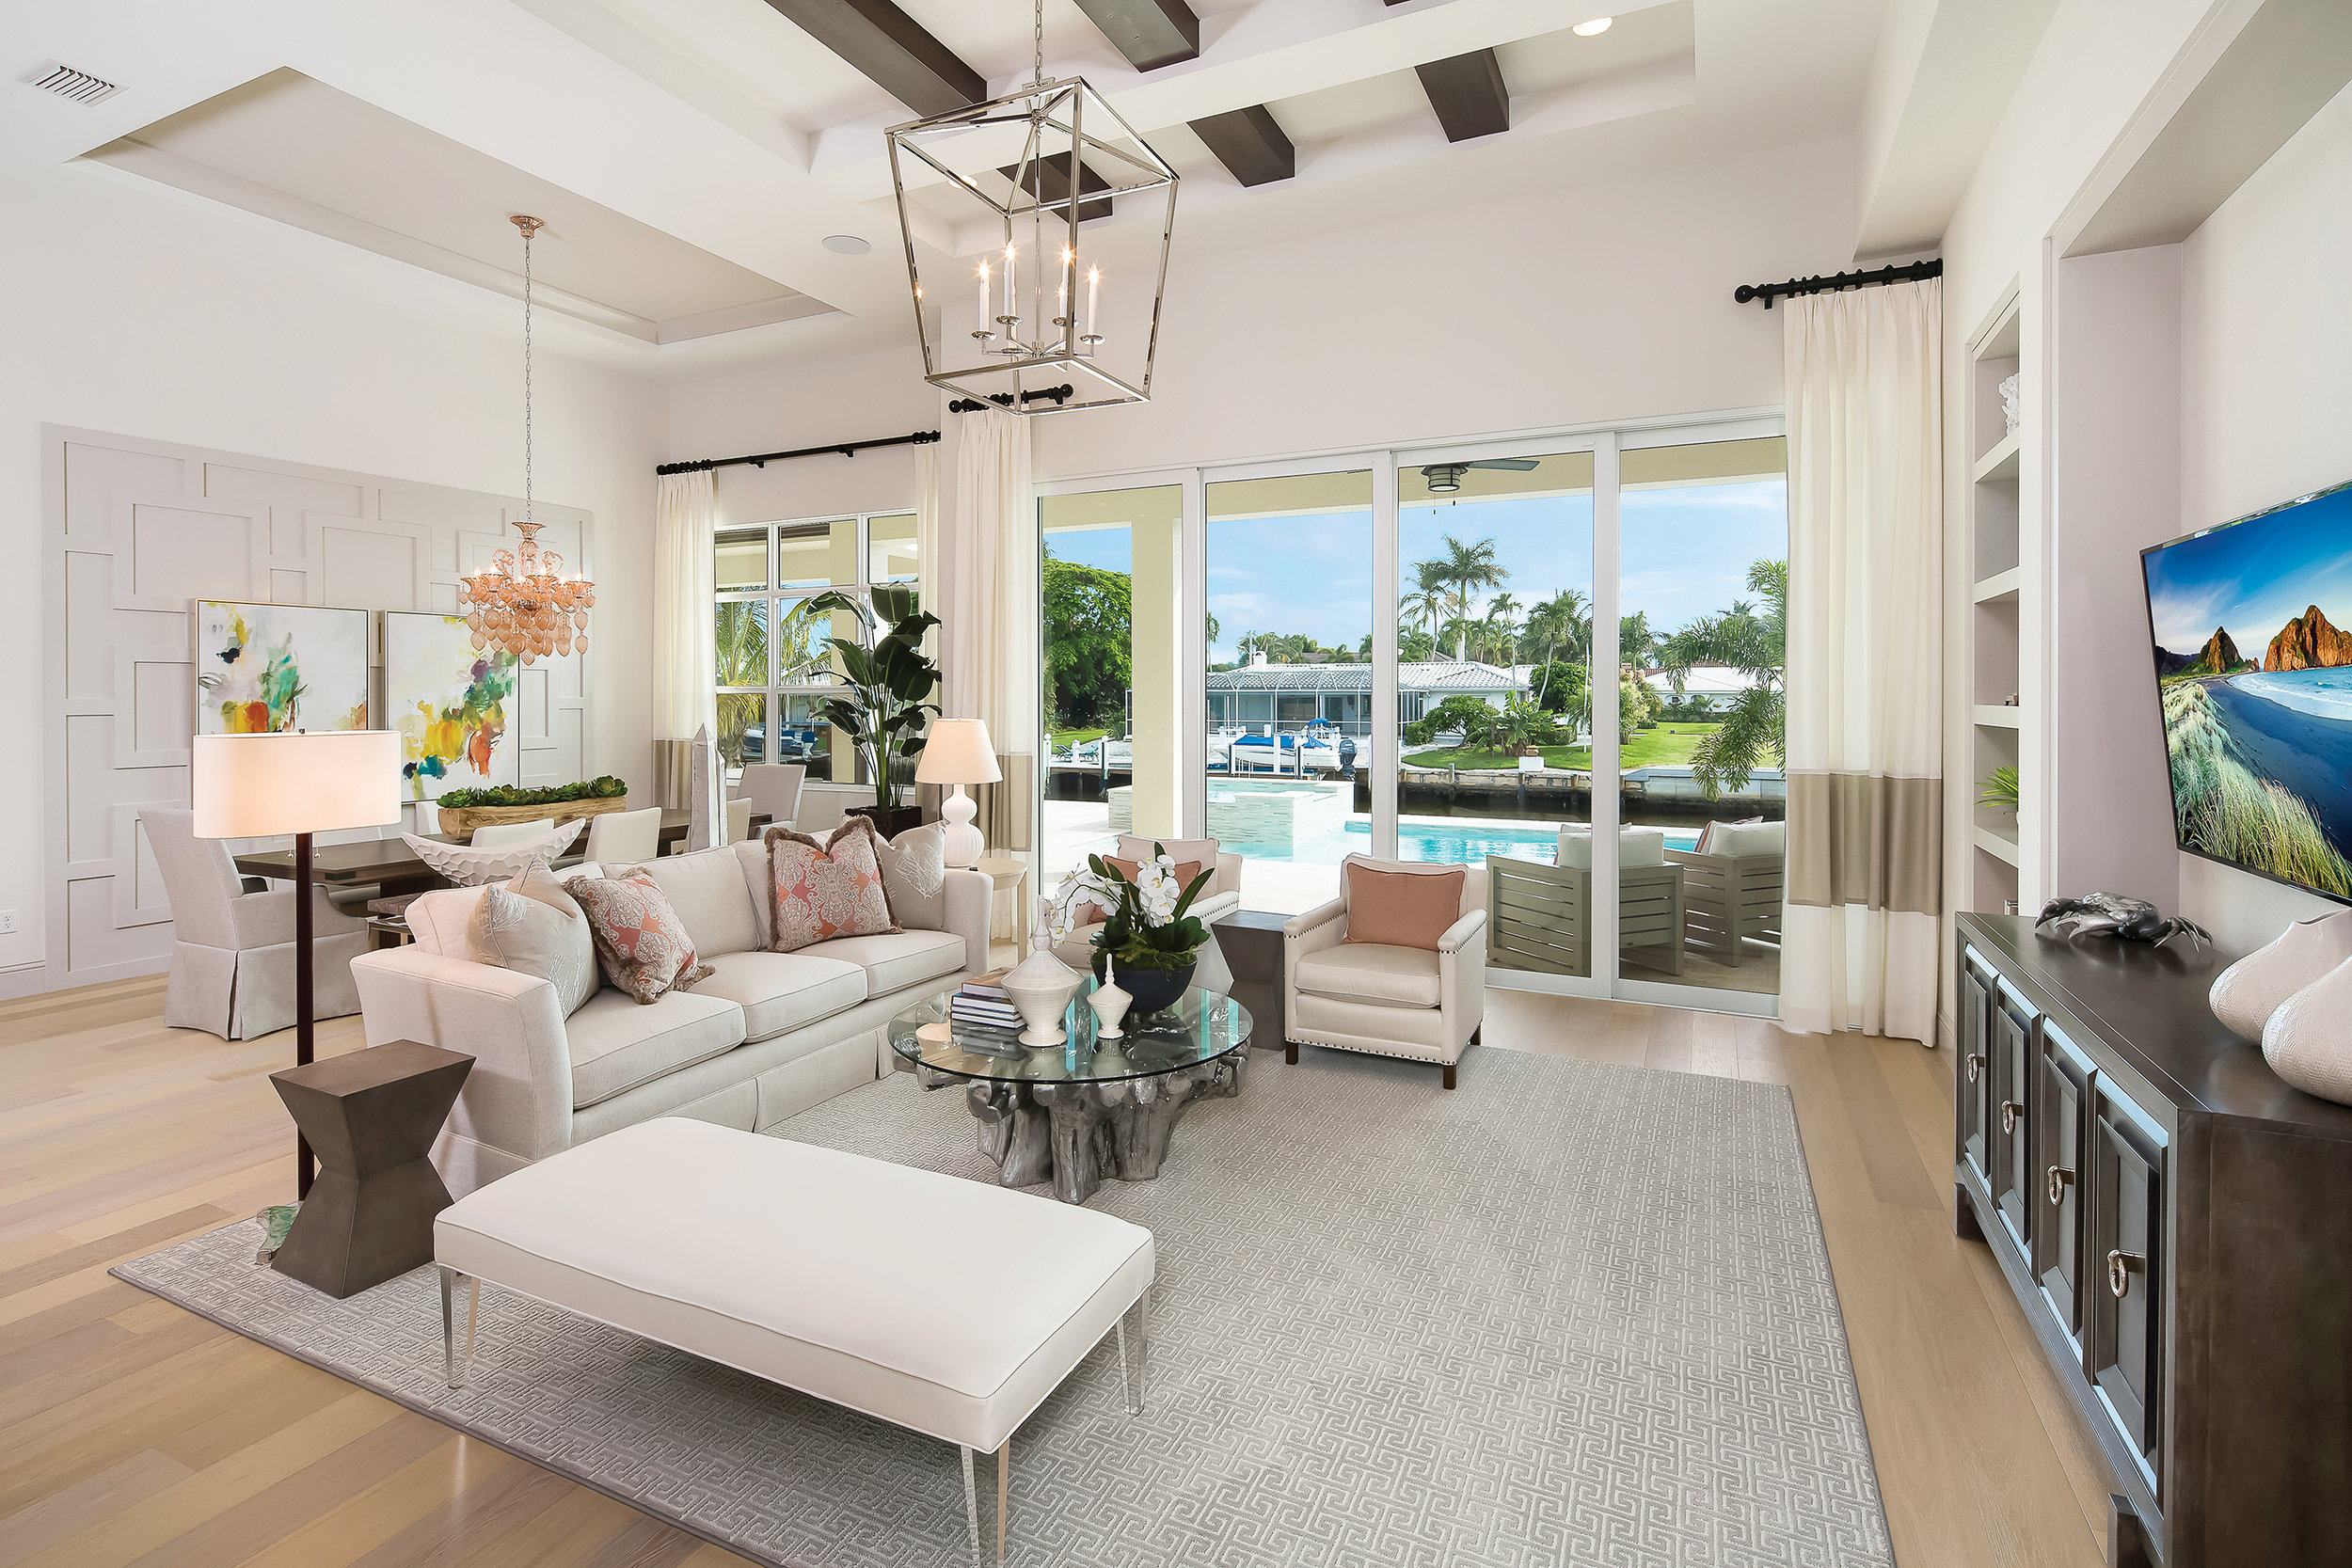  Inside, the home is open and breezy. Designer Daniel Kilgore of Soco Interiors chose light colors accented by pops of coral and dusty pink for the main areas of the home. The addition of dark wood finishes through accent pieces like side tables and 